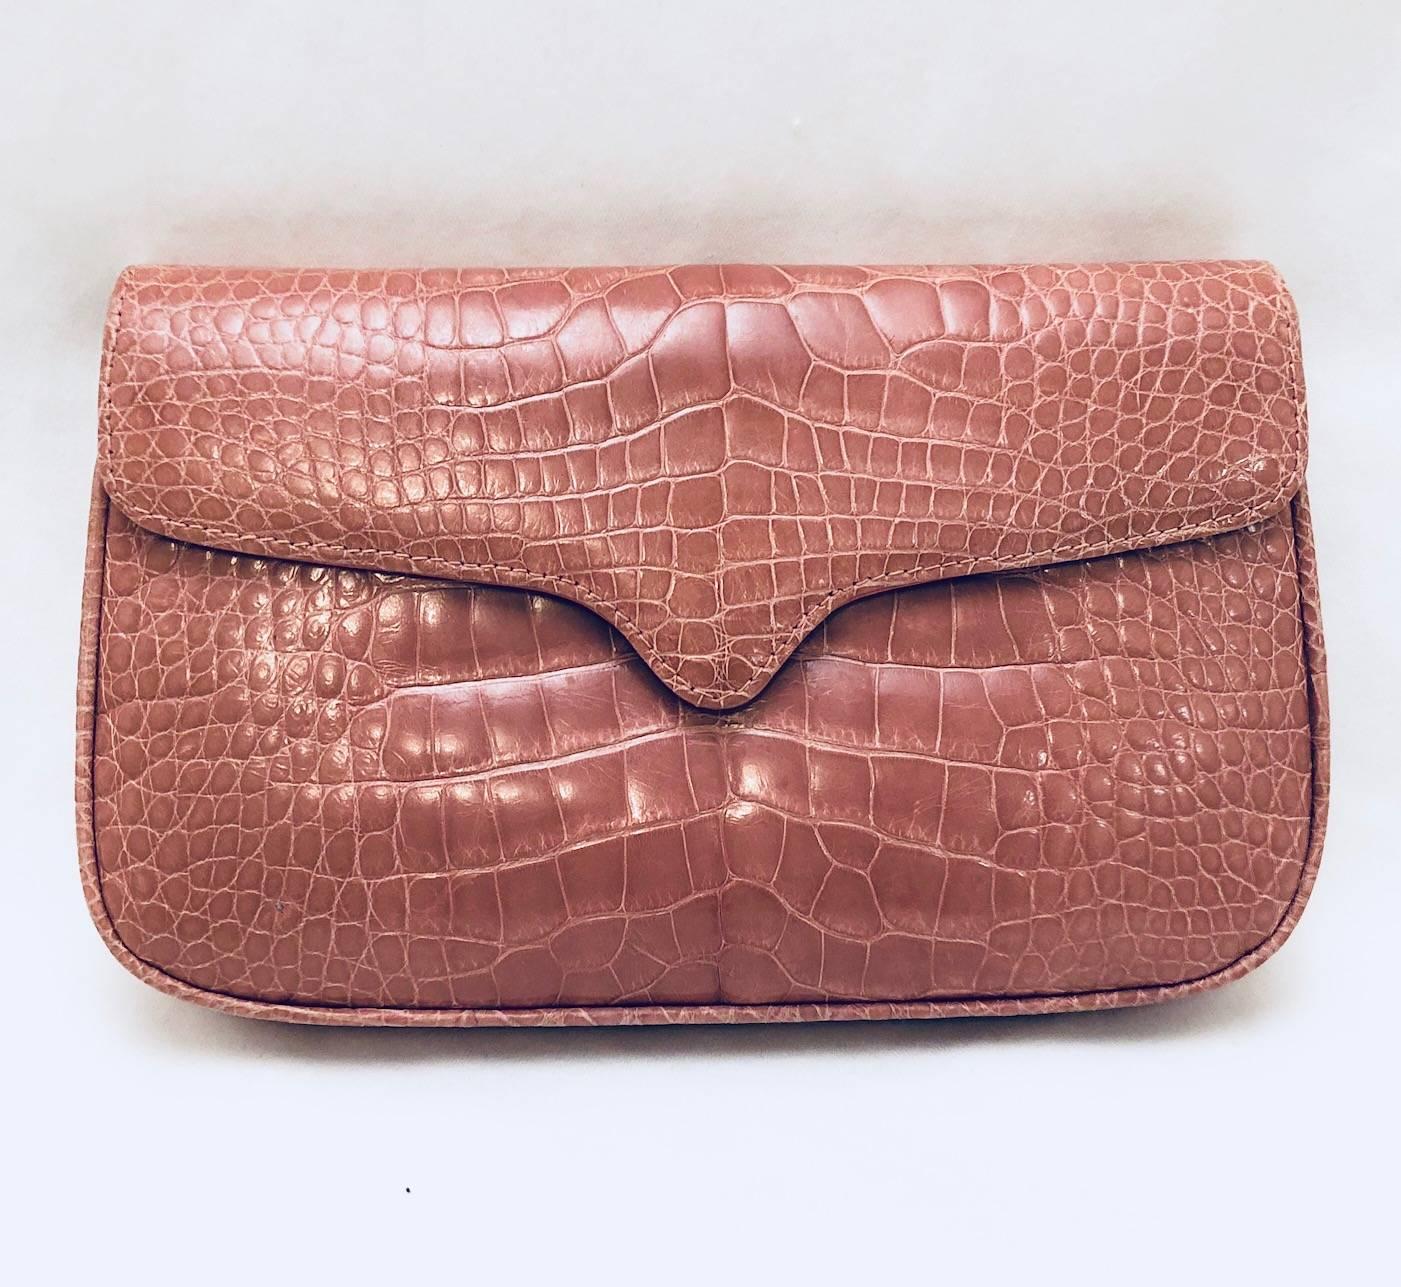 Luxurious, versatile, dusty mauve crocodile bag includes an optional blush pink beaded strap.  Of course, shoulder bag converts to a remarkable clutch!  Crafted from the finest materials, structured bag has flap front that opens to reveal pink